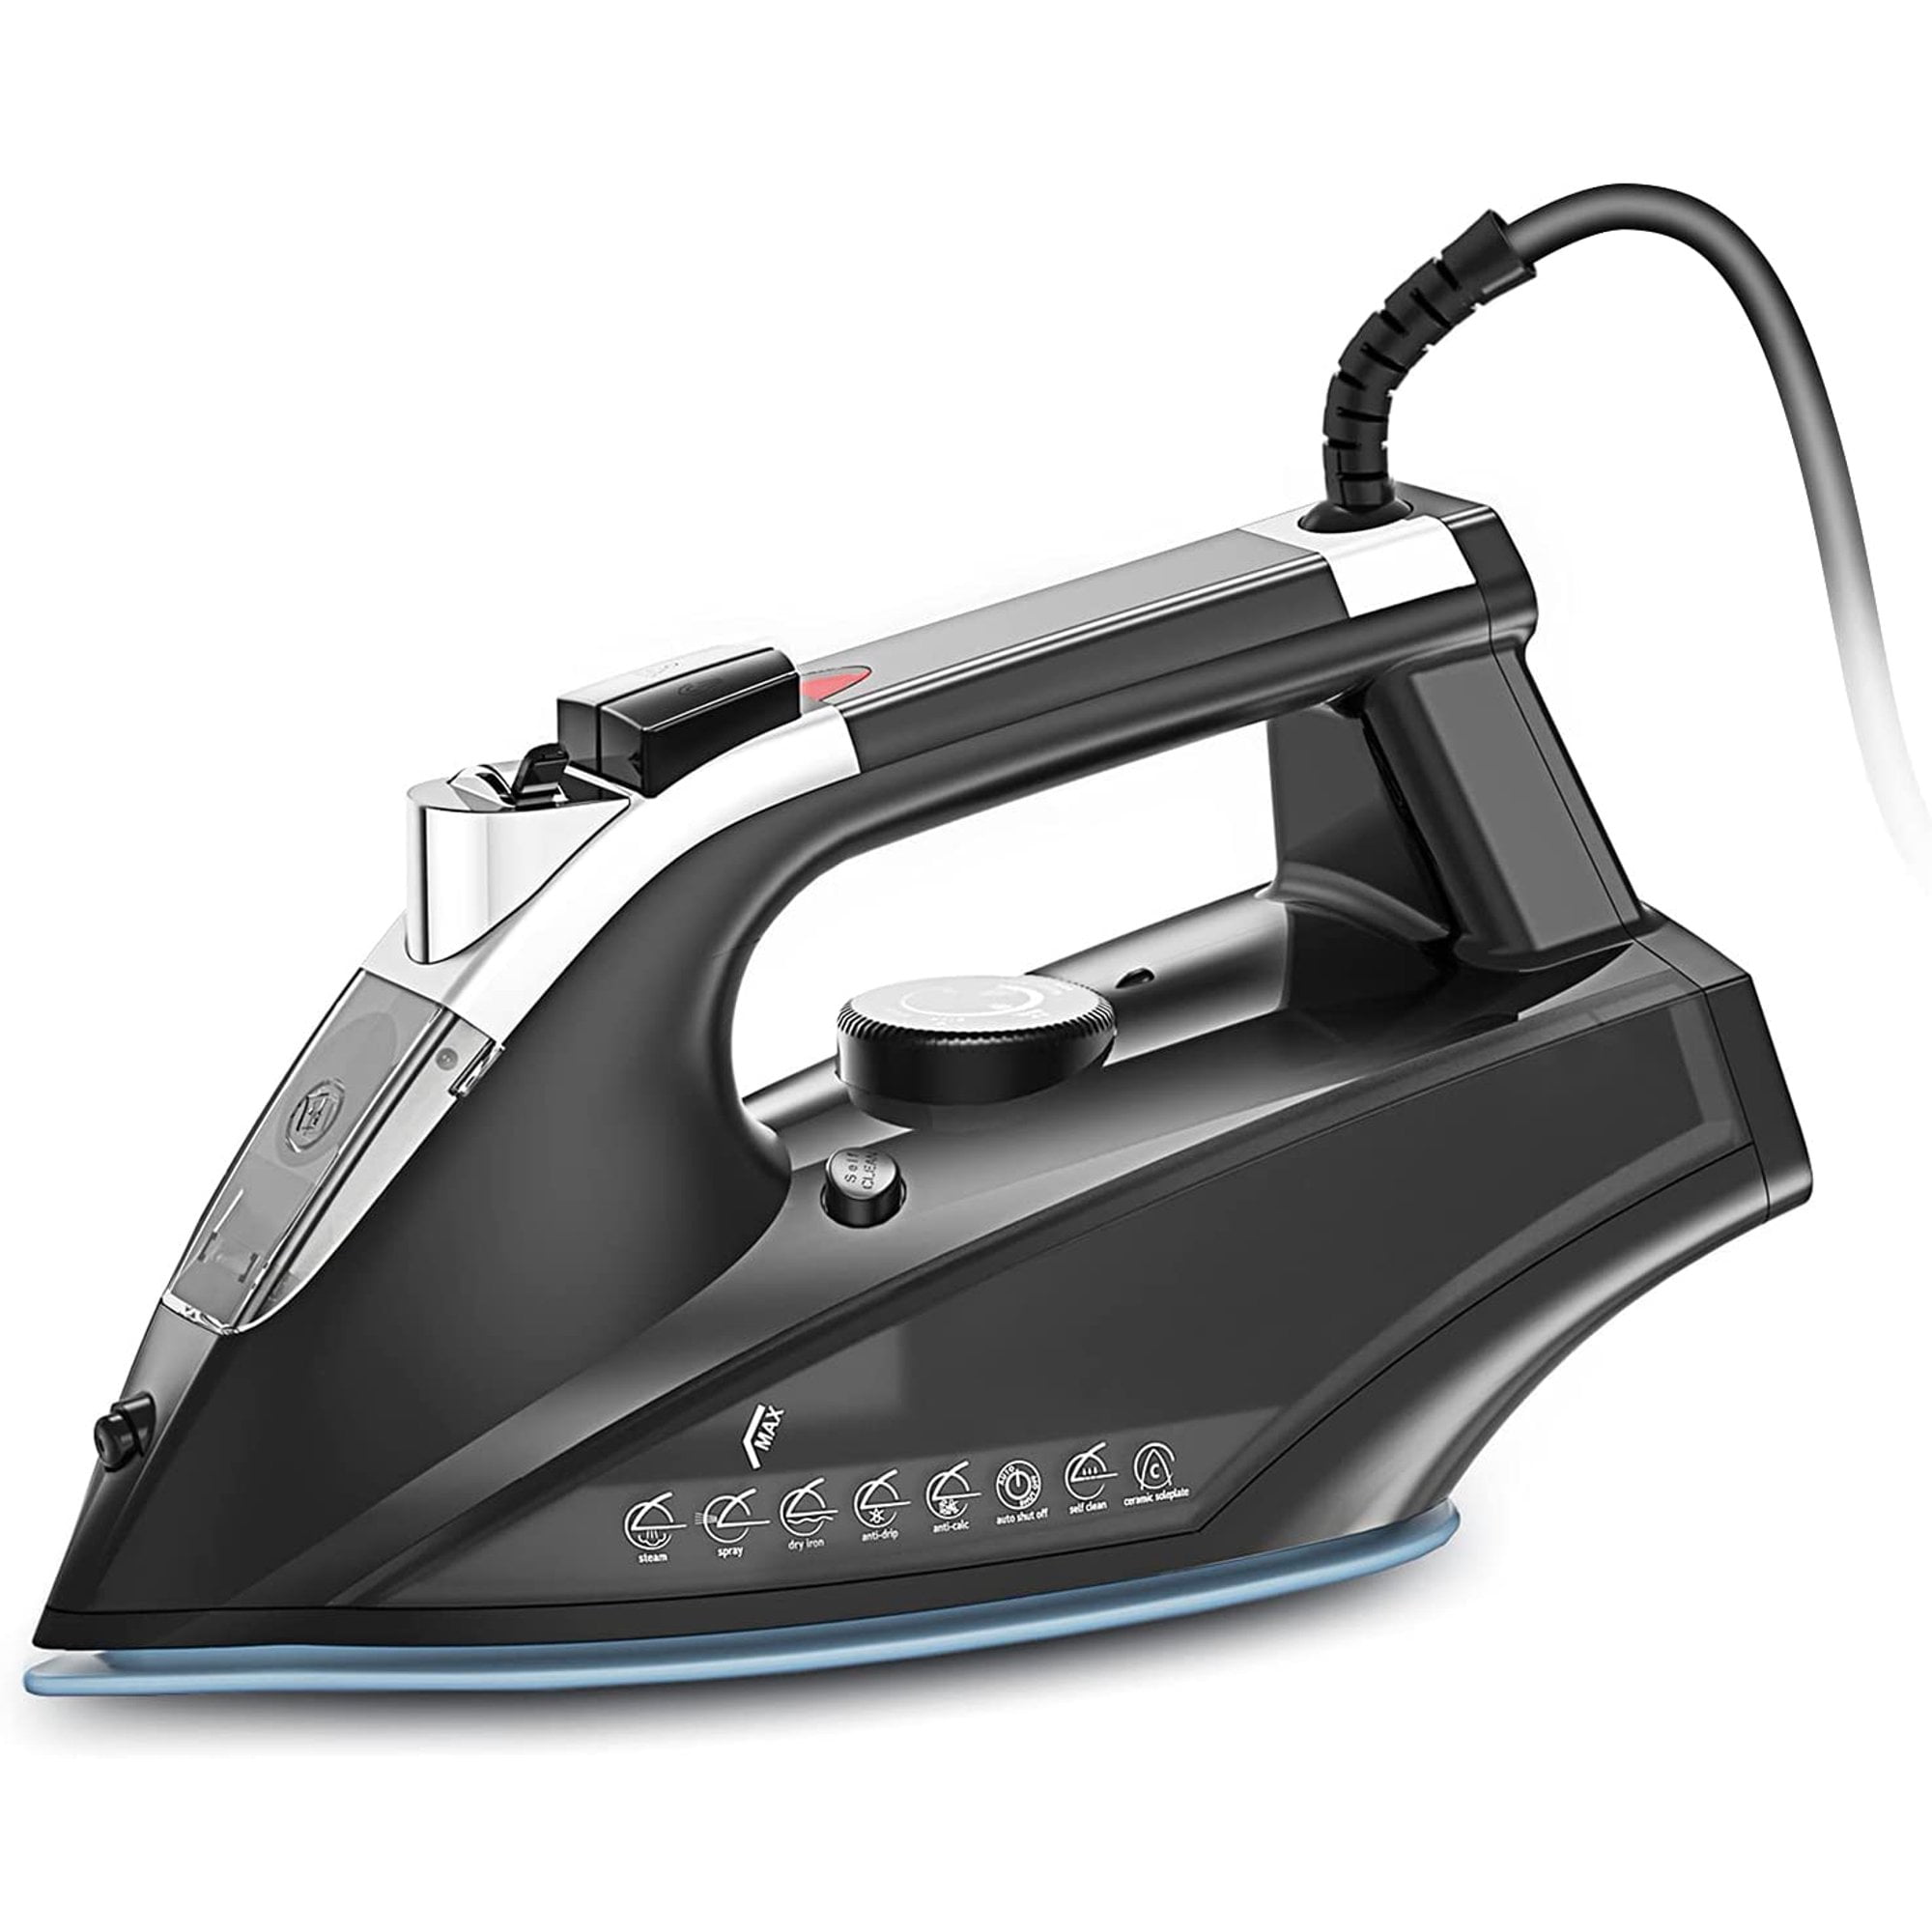 Wonders of Steam Pressed Iron. When looking for irons, one can